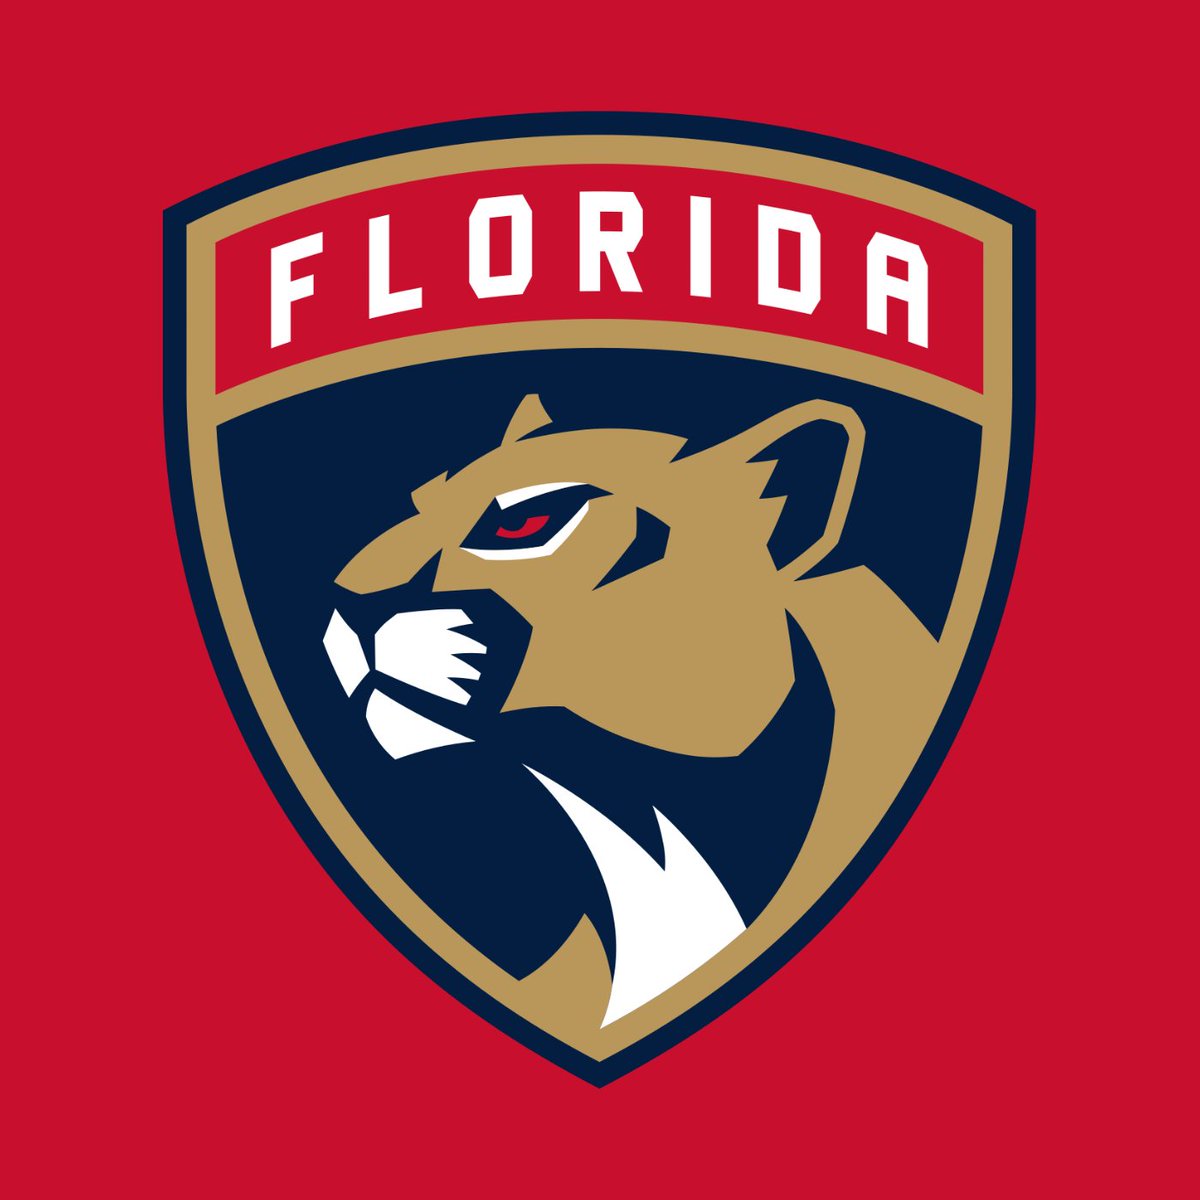 With the 183rd overall selection in the NHL Draft, the Florida Panthers are proud to select: This Idiot. https://t.co/oeTJ8zQRlU